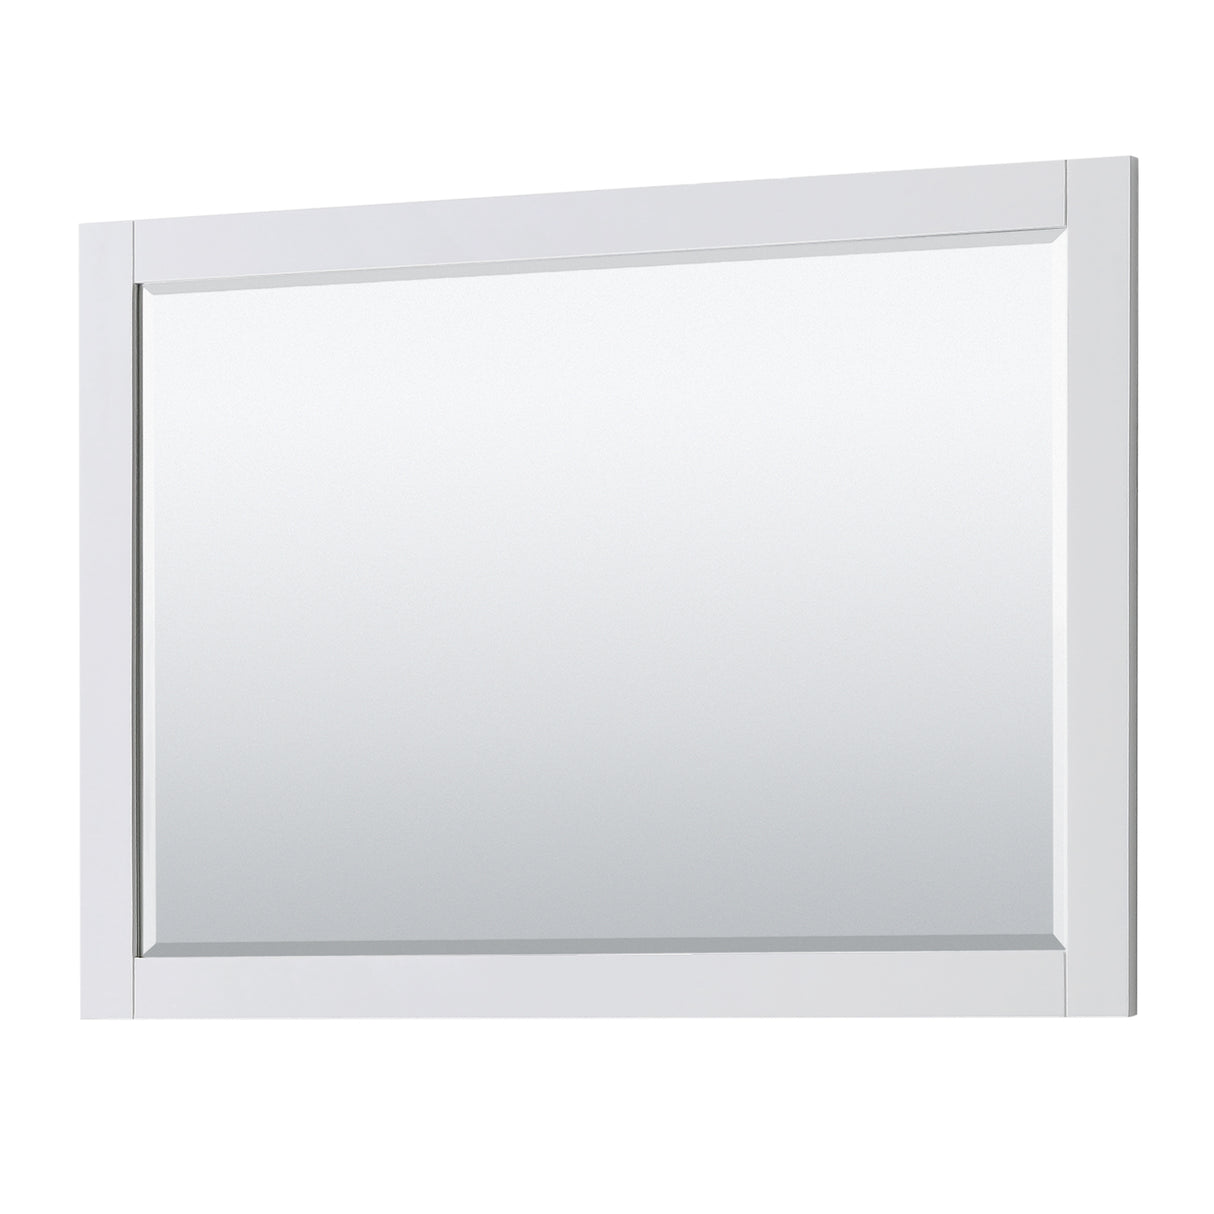 Avery 48 Inch Double Bathroom Vanity in White White Carrara Marble Countertop Undermount Oval Sinks 46 Inch Mirror